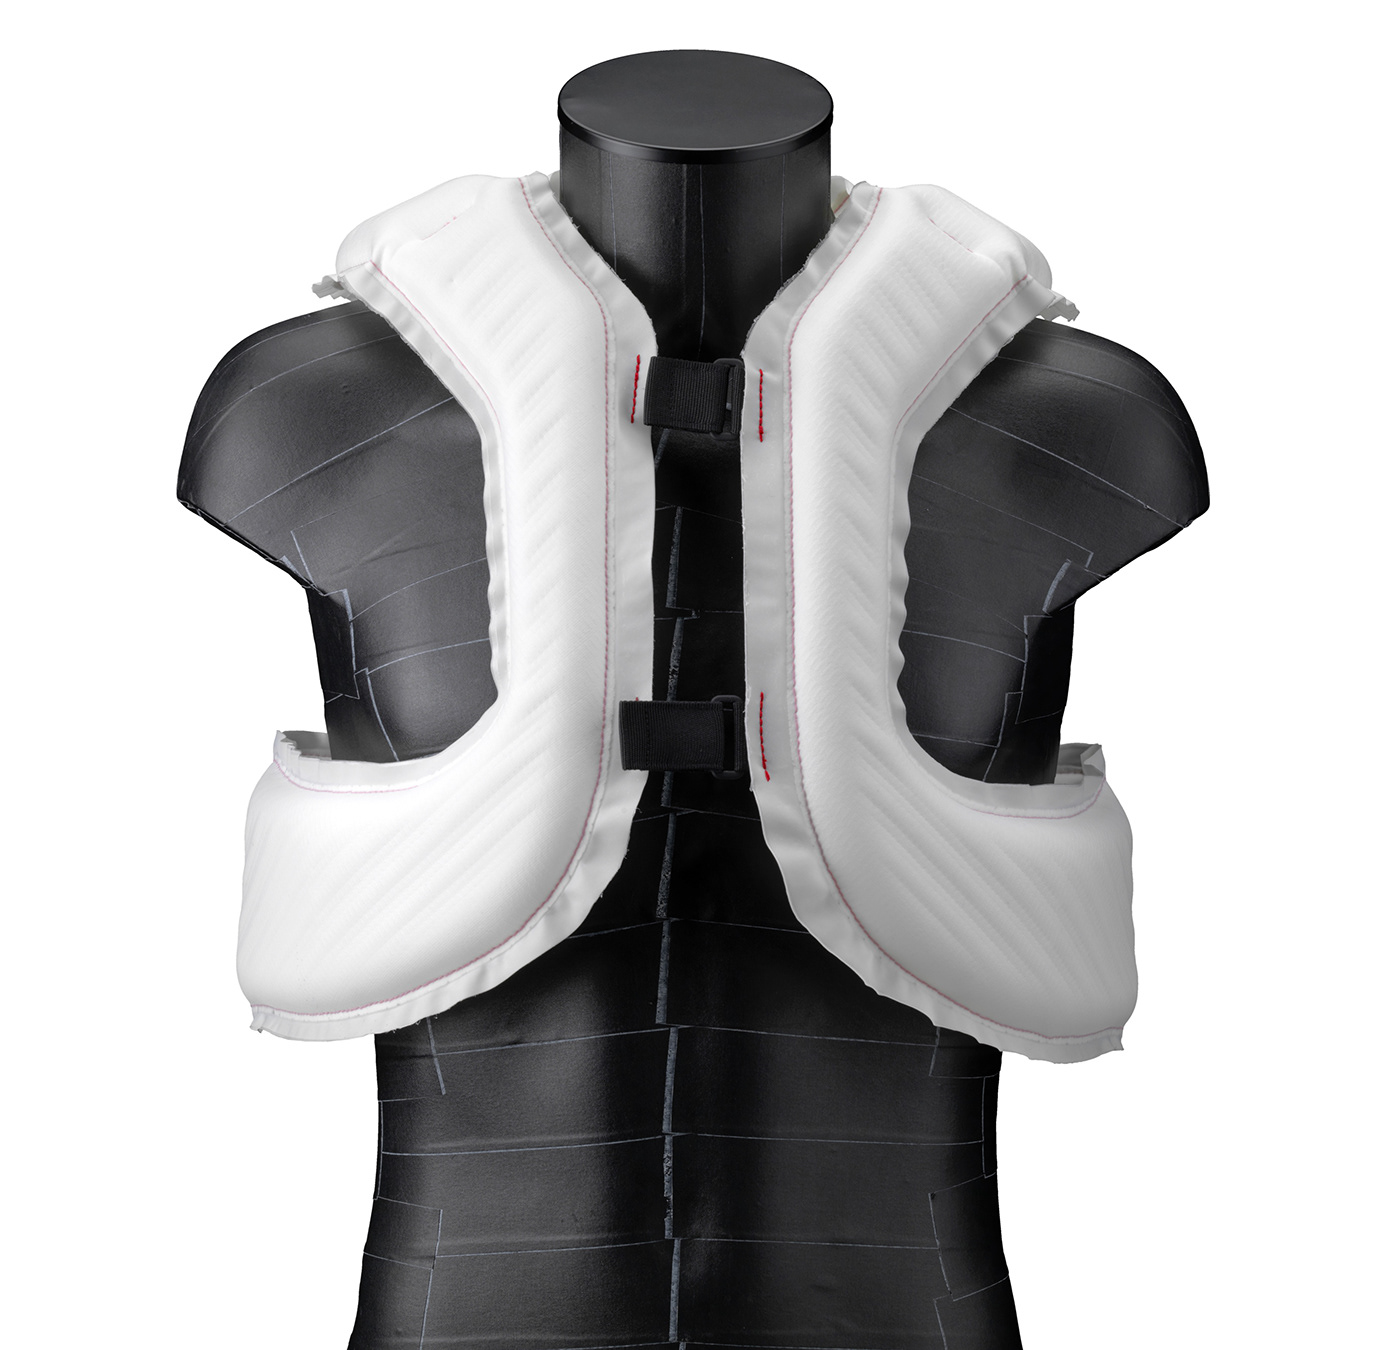 Airbag body city Health mobility protection safety Urban Clothing commuting